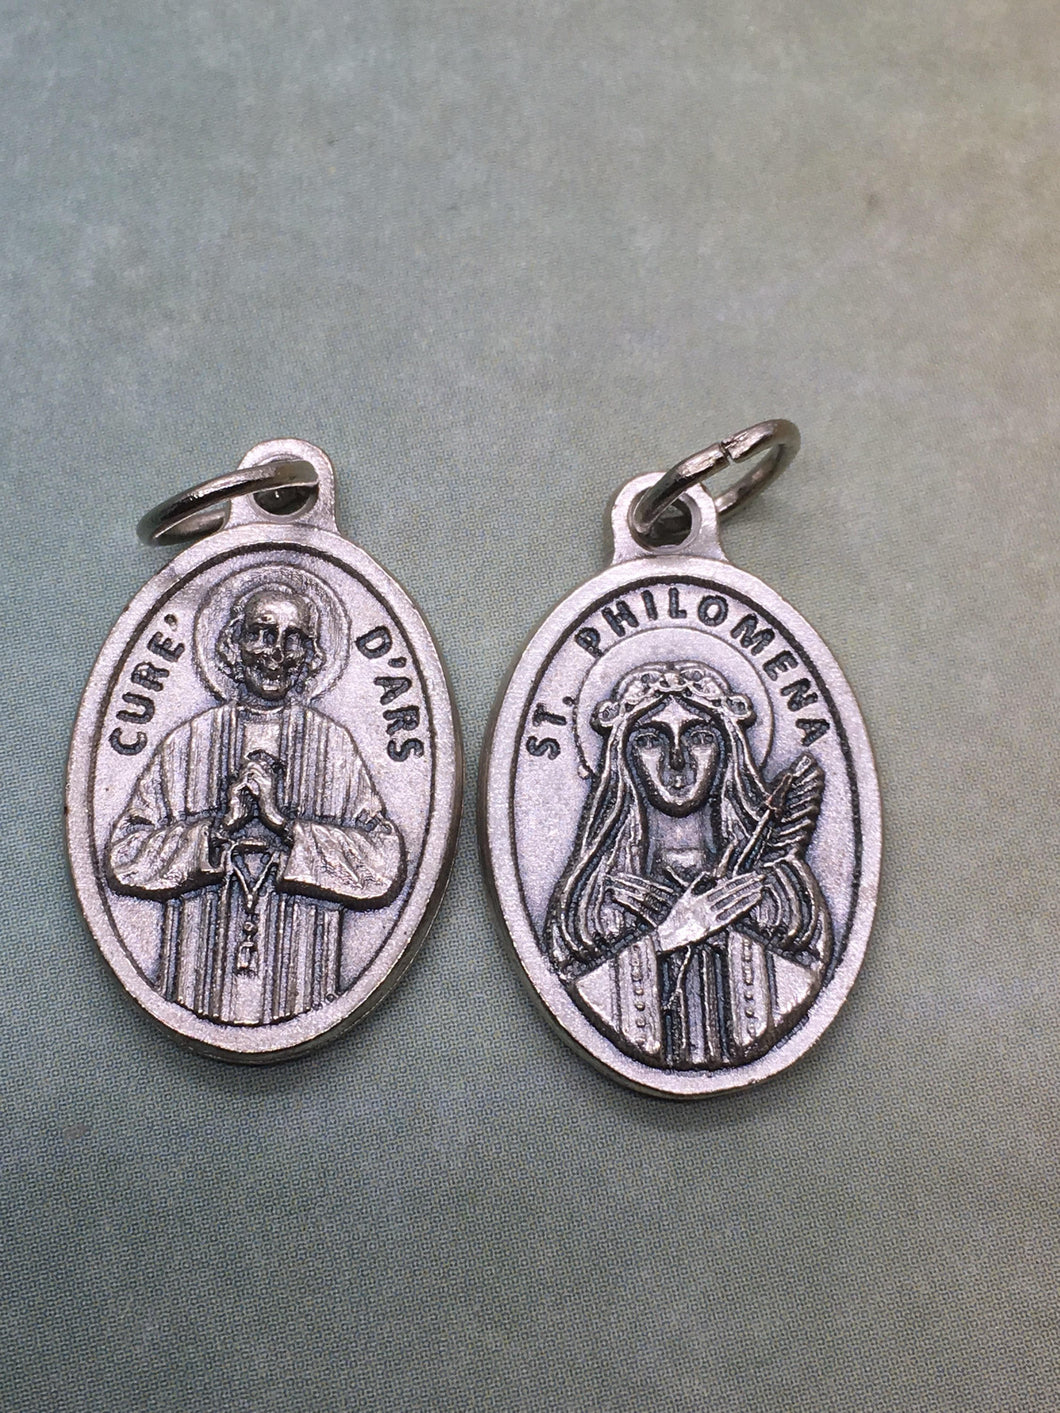 St. Philomena/Cure D'Ars holy medal